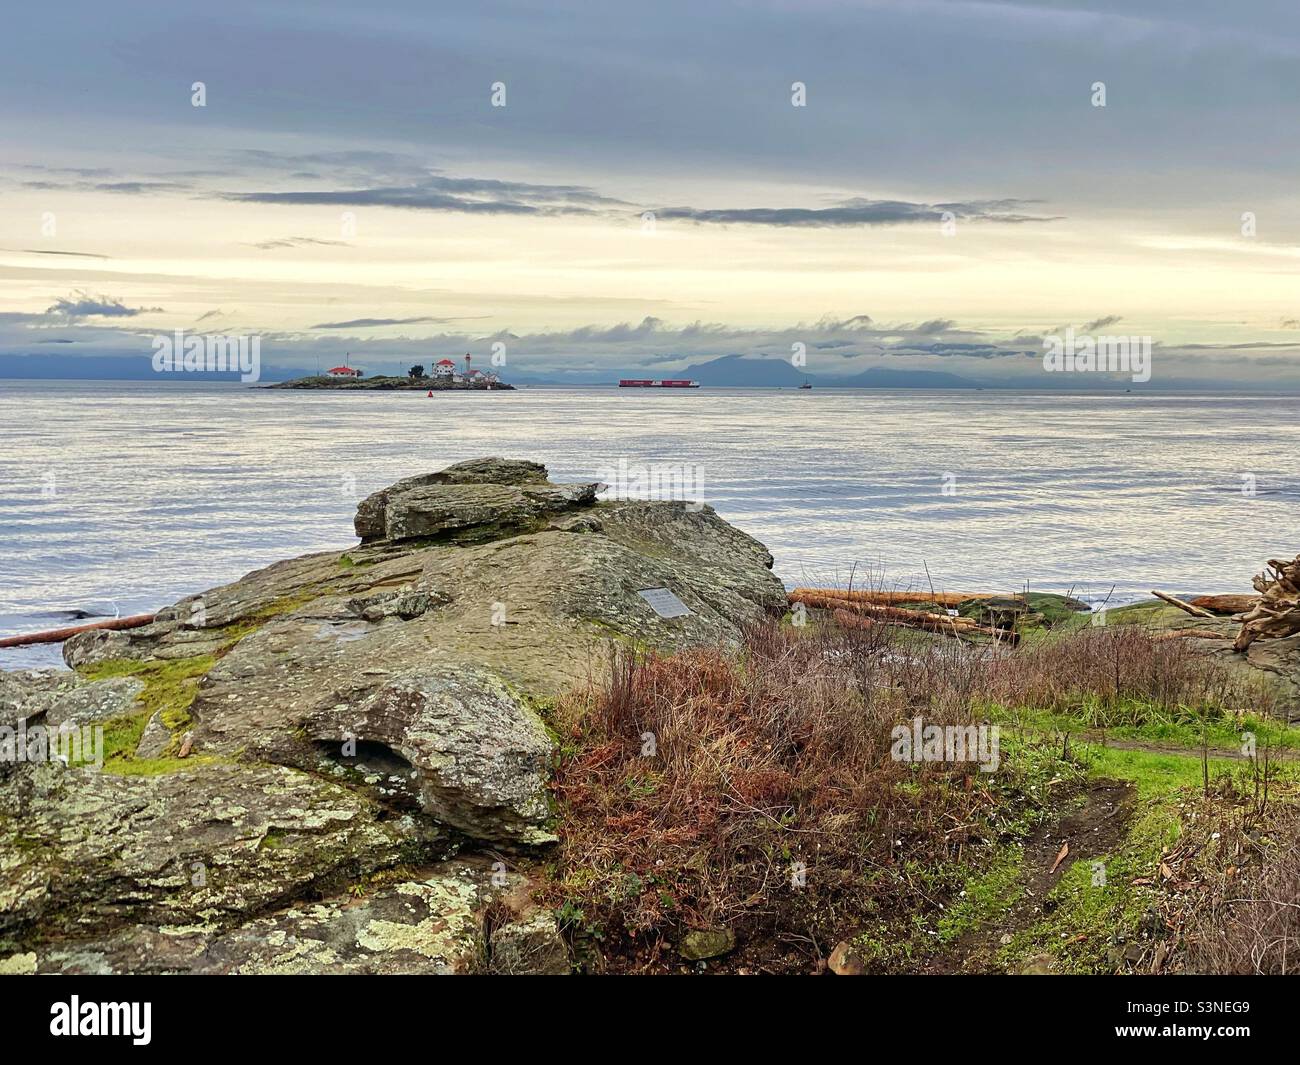 From a rocky point on a beach in British Columbia‘s Gulf Islands, the view is of a lighthouse in the Strait of Georgia and in the distance, tugboat towing two barges. Stock Photo